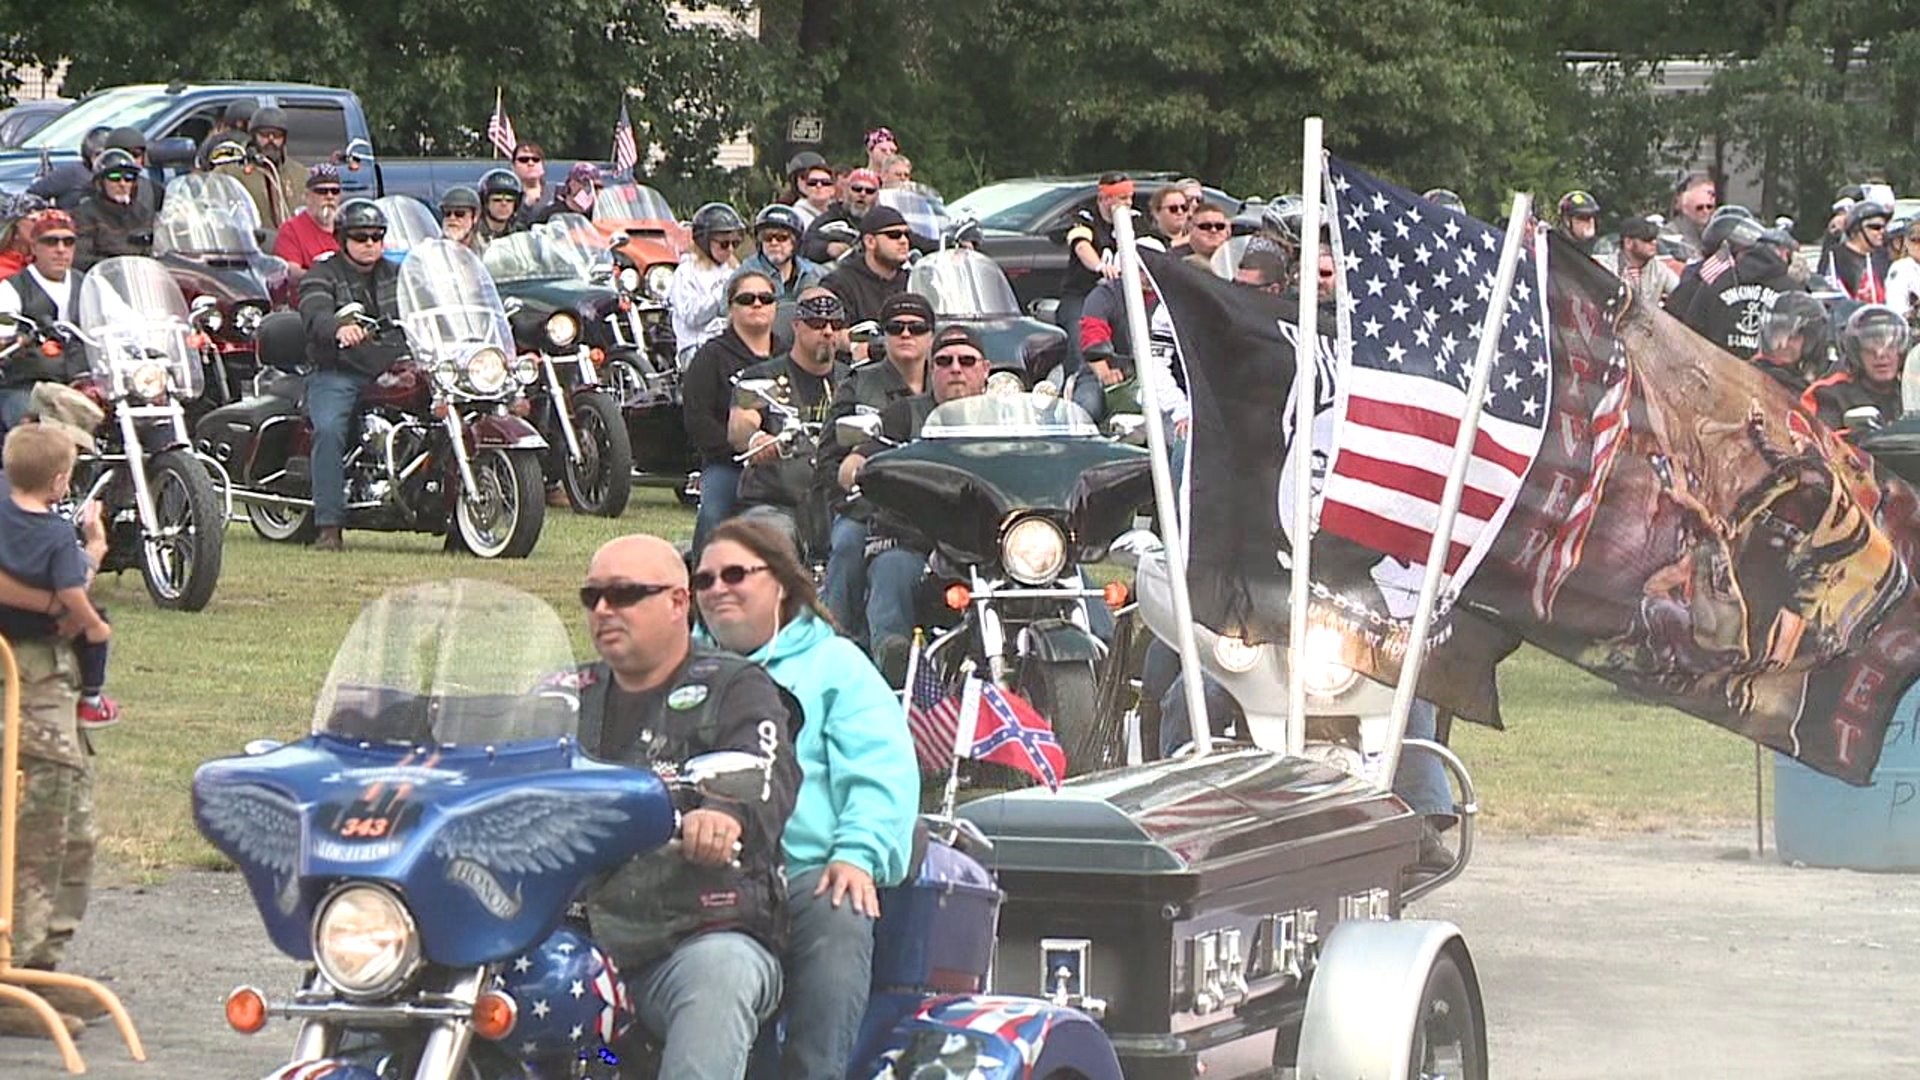 12th Annual Motorcycle Ride in Memory of Sgt. Argonish